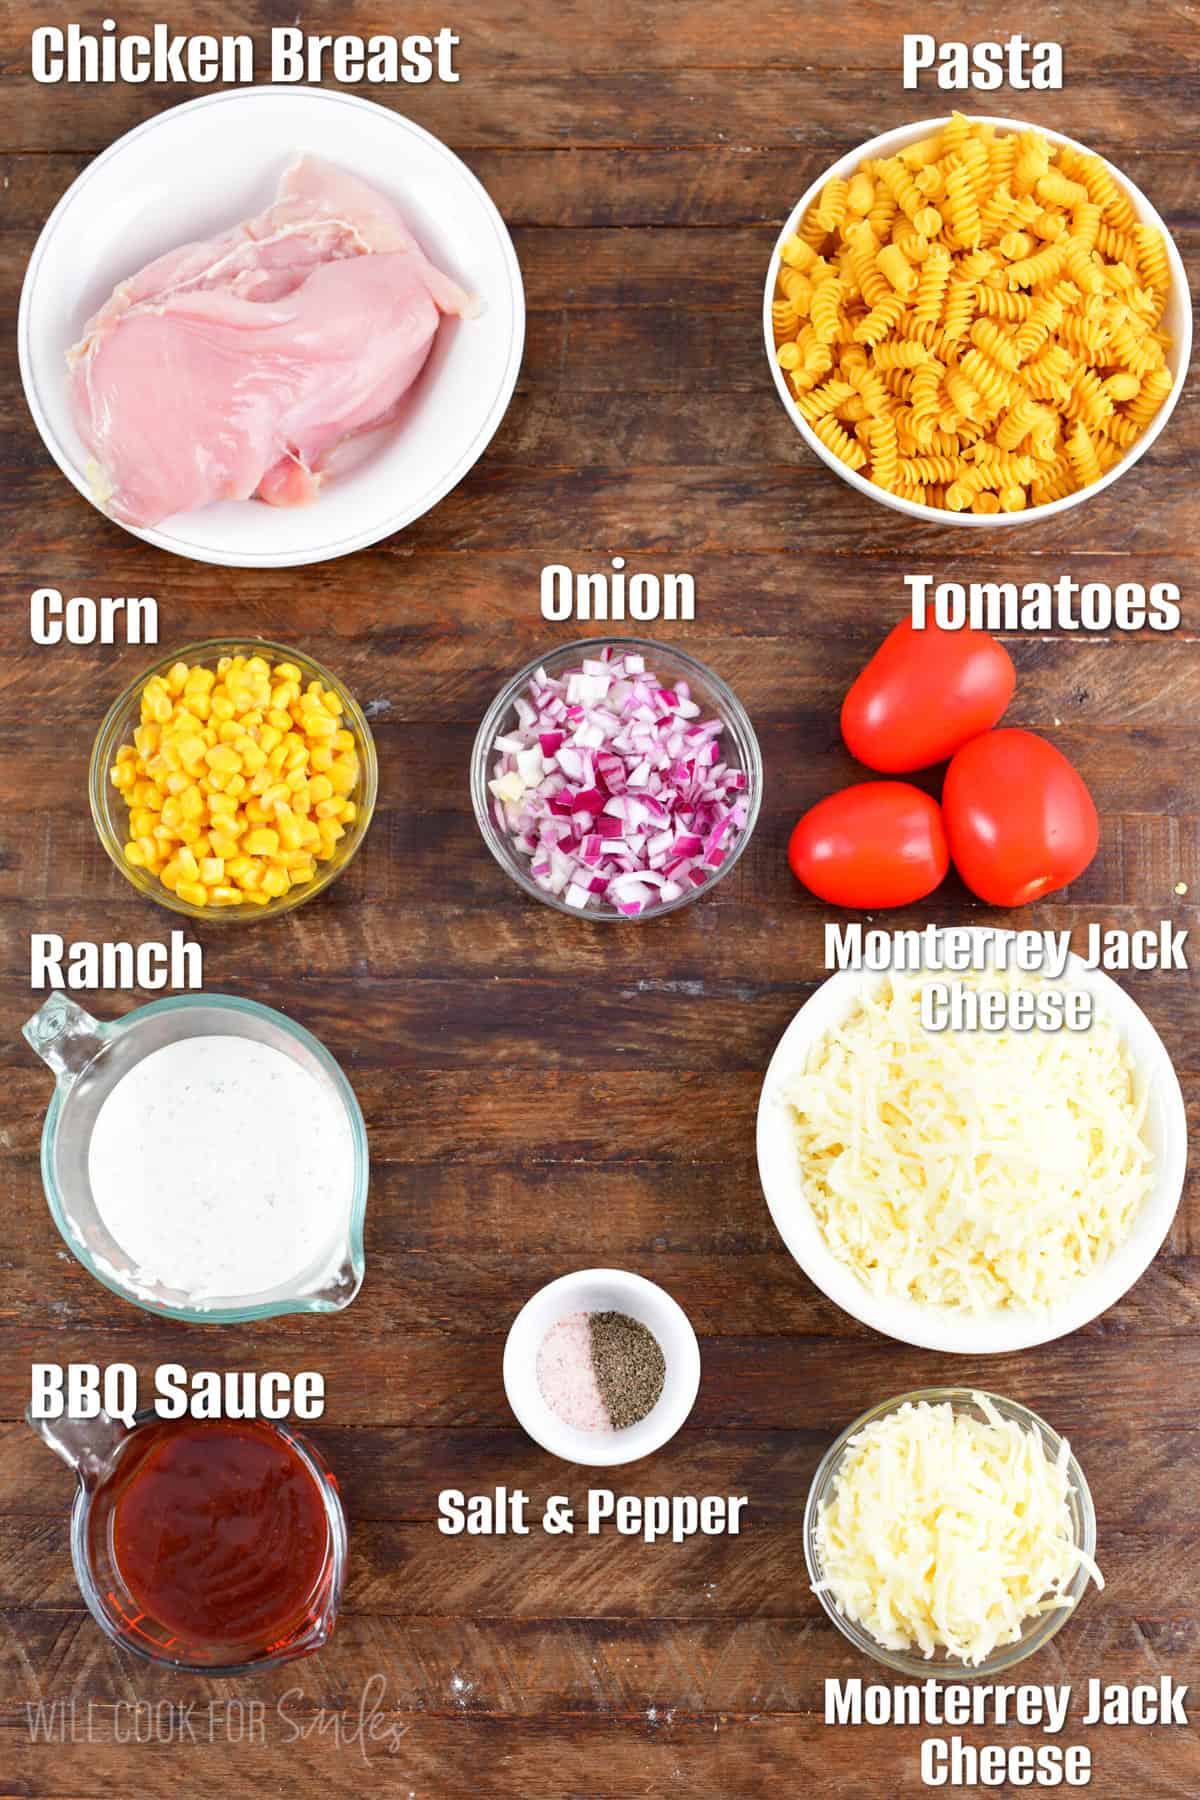 Labeled ingredients for BBQ ranch chicken pasta bake on a wood surface.